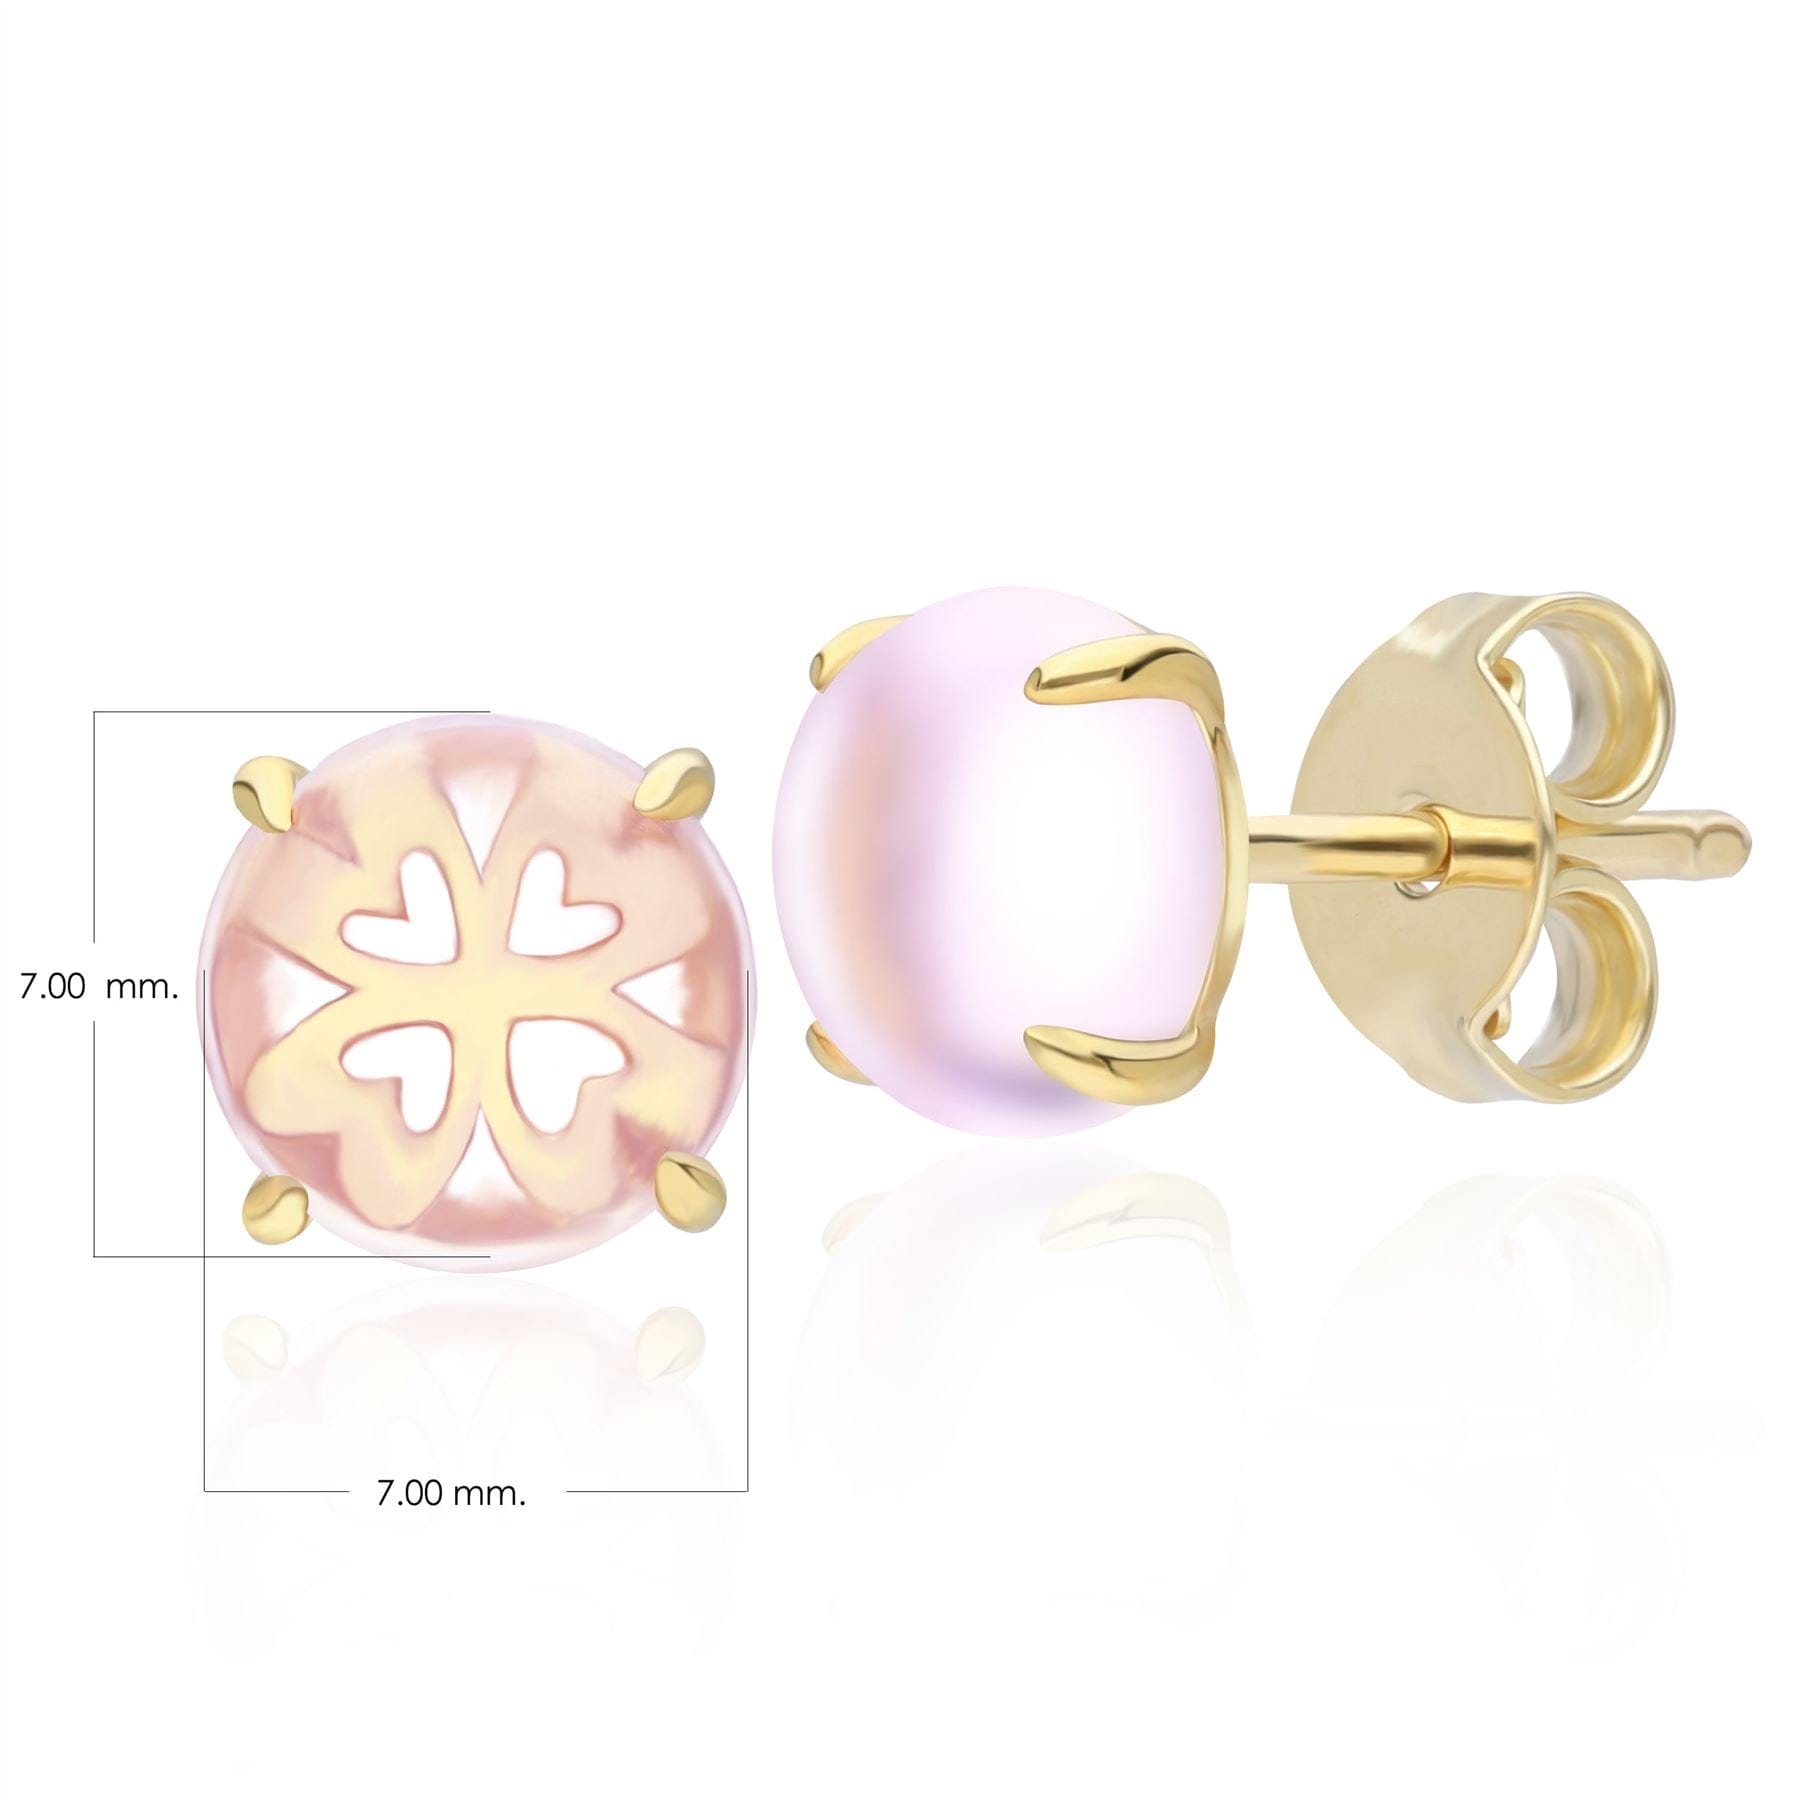 253E391802925 Gardenia Pink Amethyst Cabochon Stud Earrings in Gold Plated Sterling Silver Dimensions